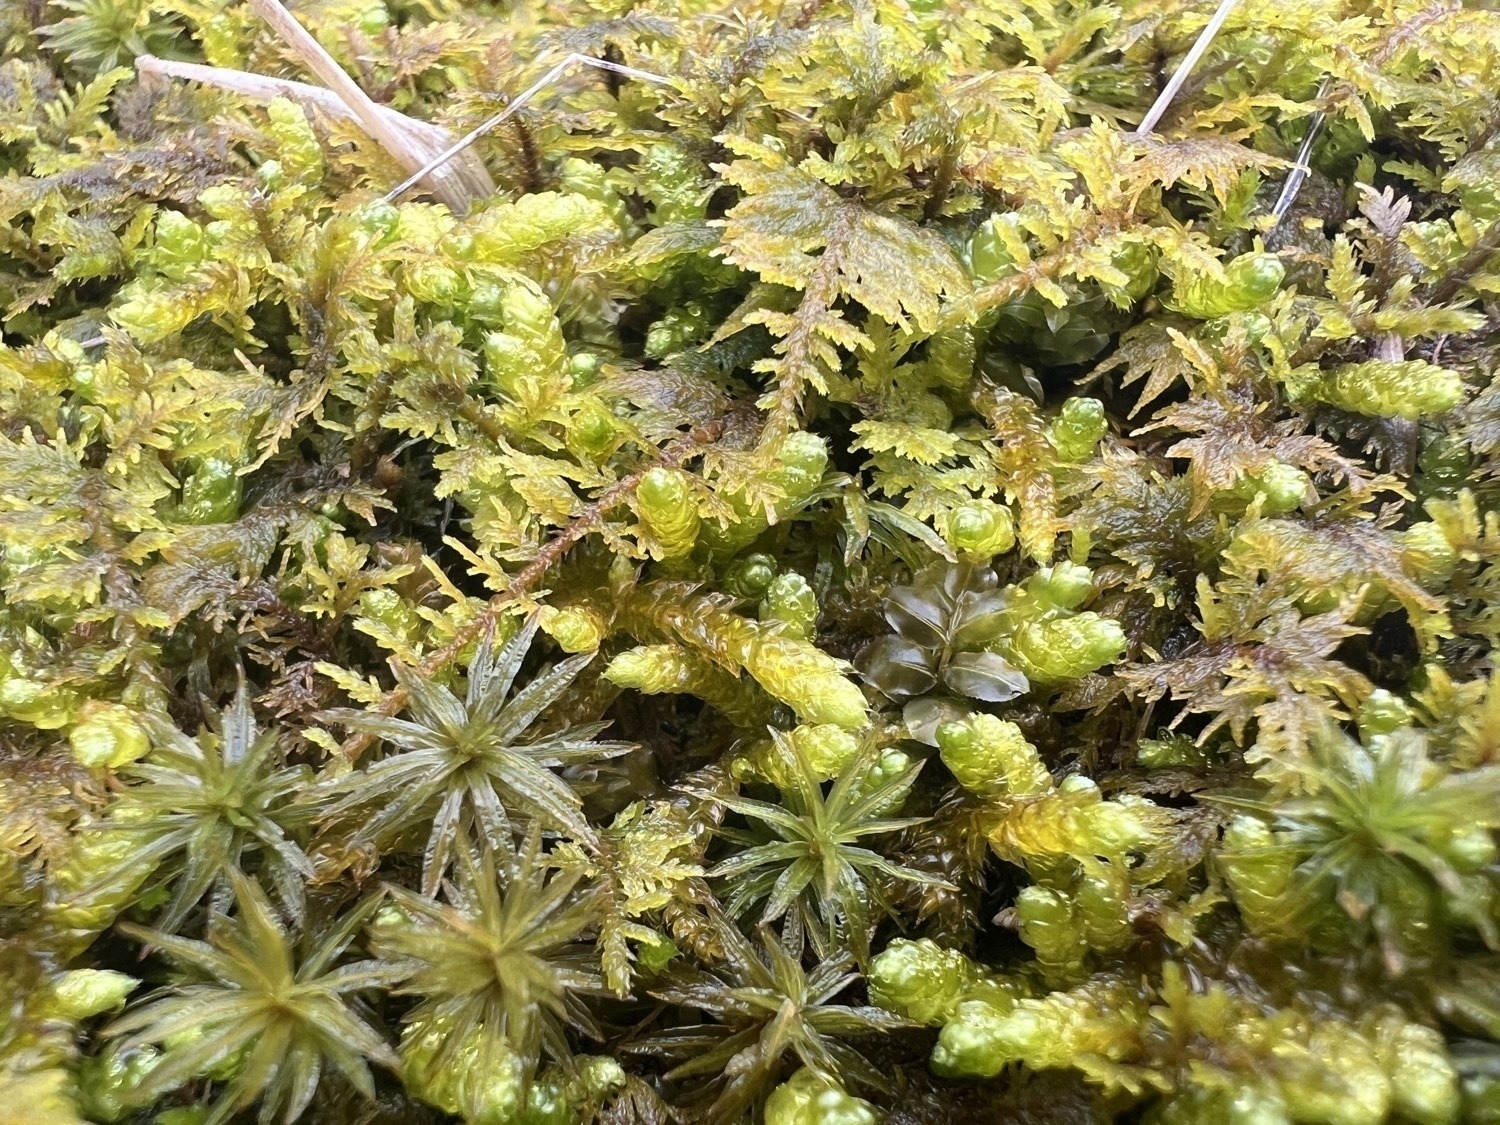 A mix of various species of moss in a very close-up photo. At least 3 different species are visible.